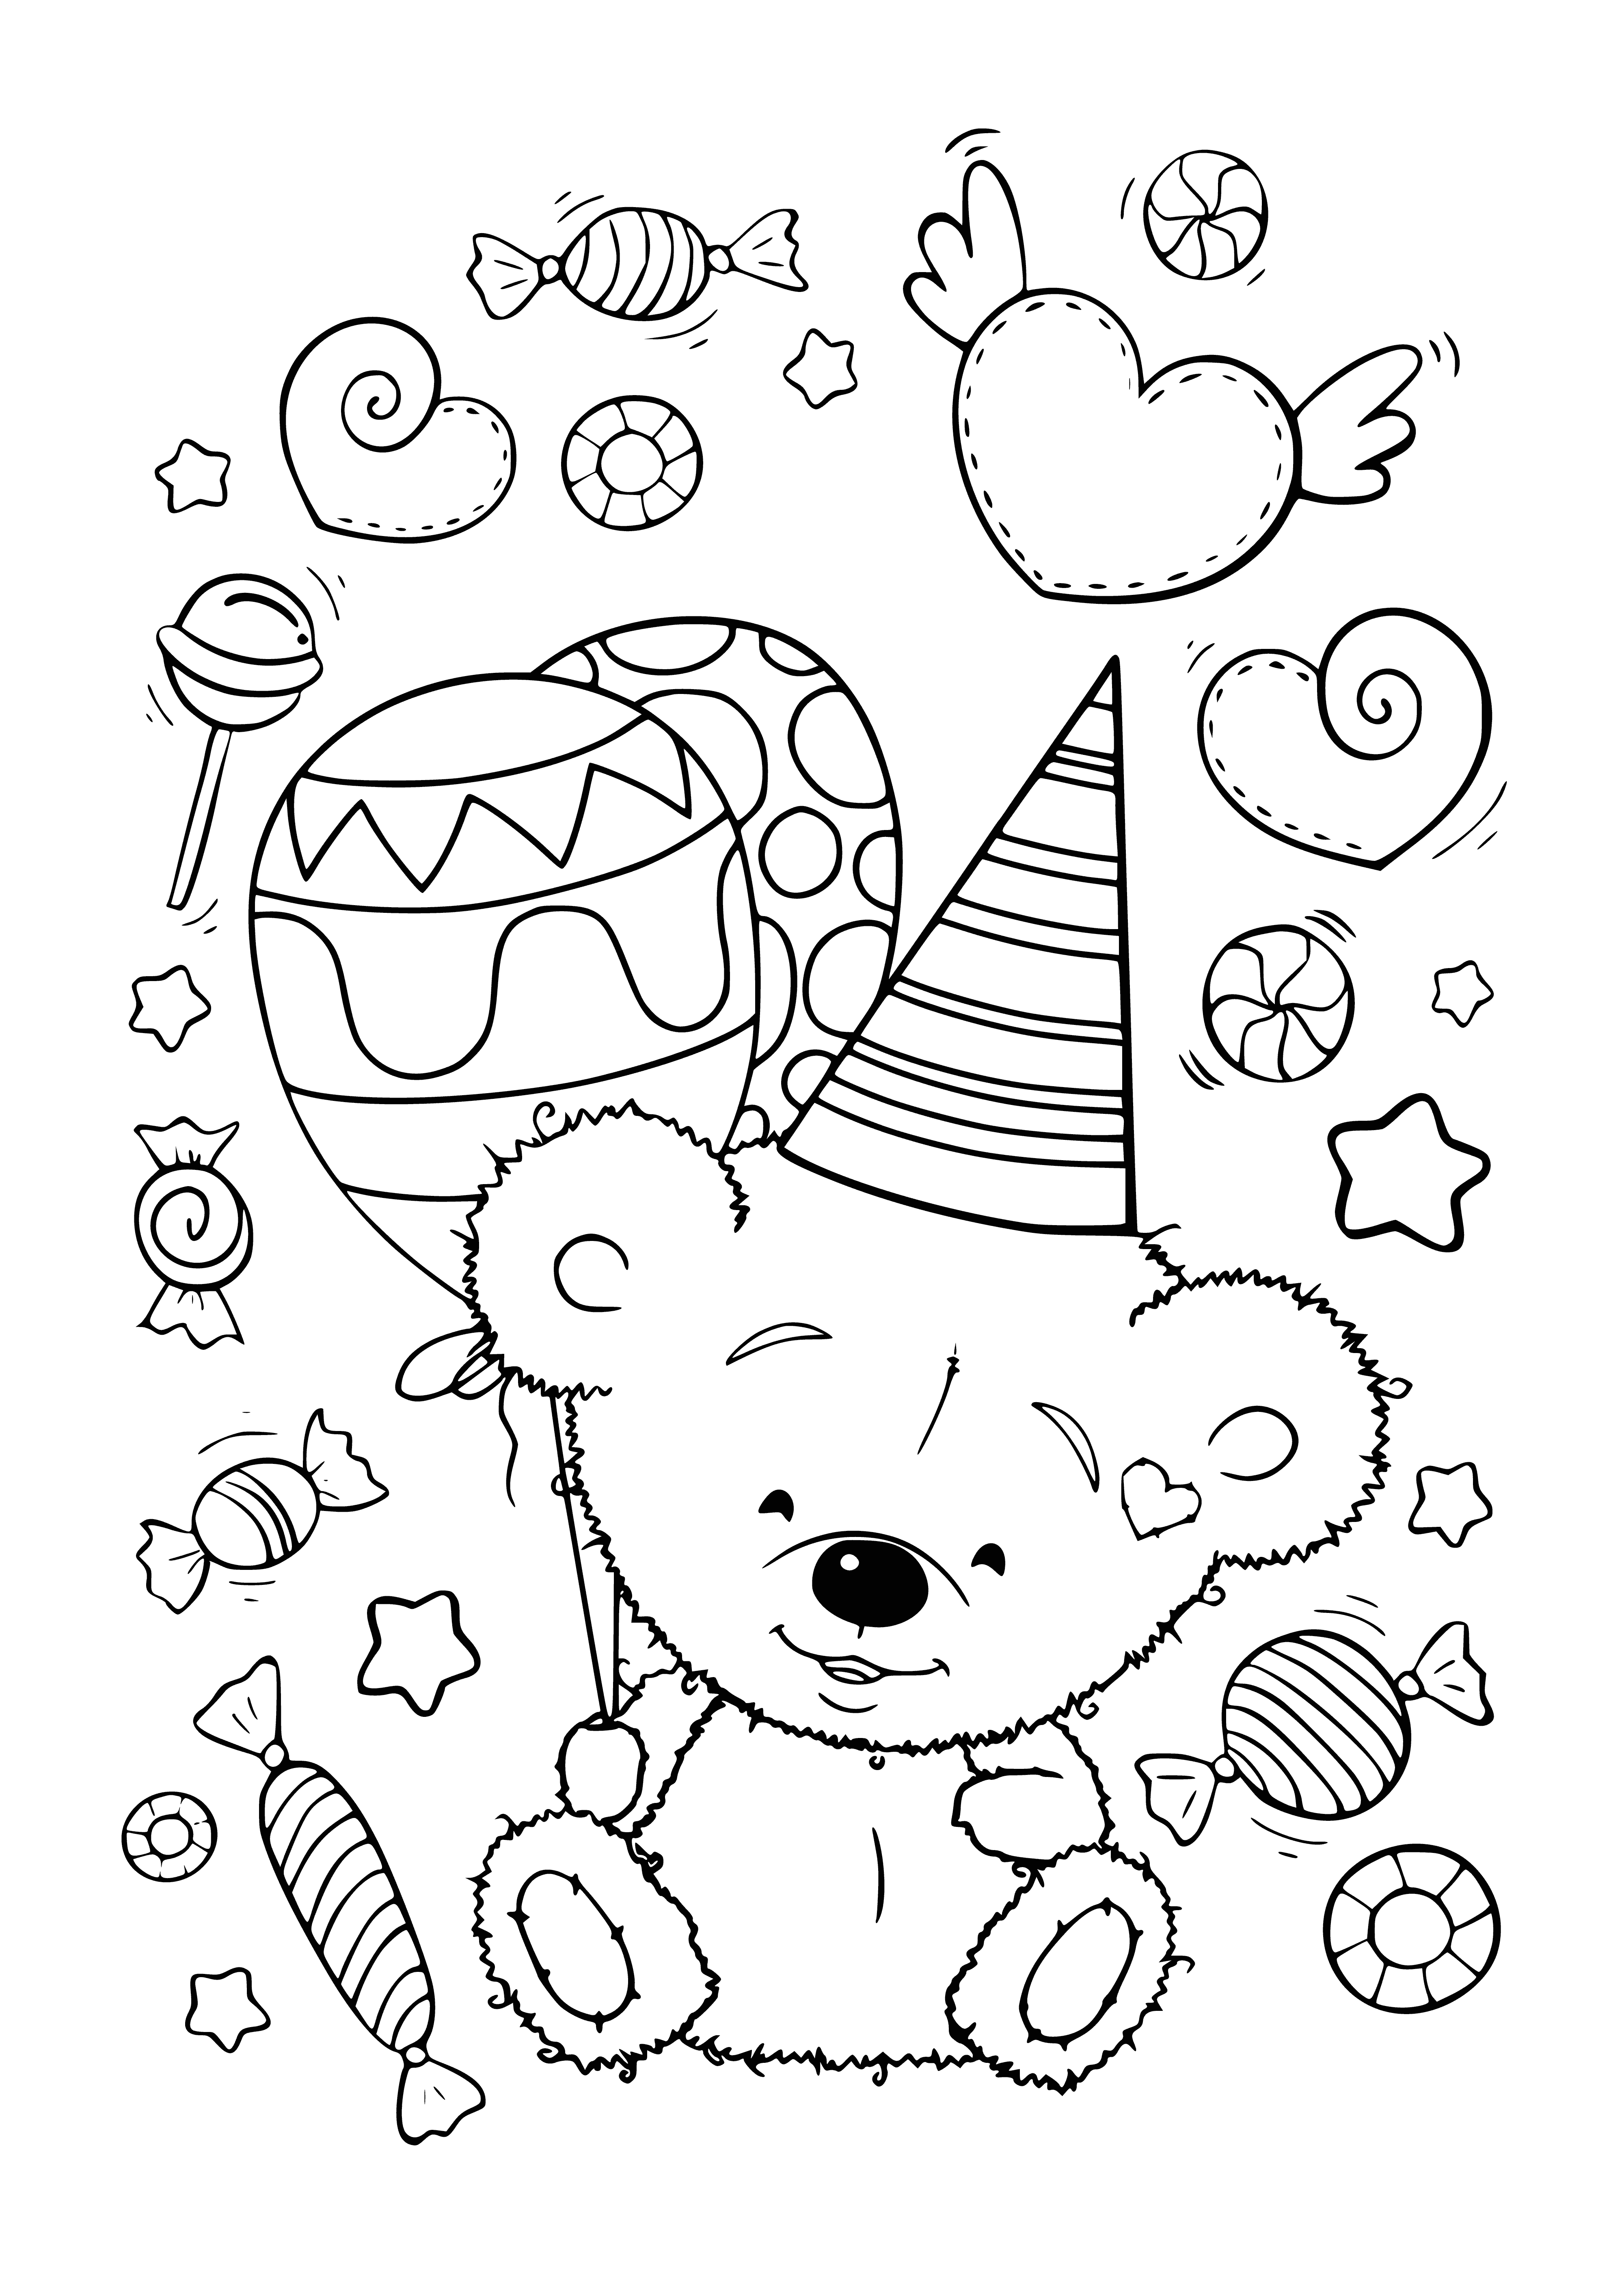 coloring page: Color a festive teddy bear surrounded by gifts, a tree, and lights - perfect to get into the holiday spirit! #ColorMeHappy